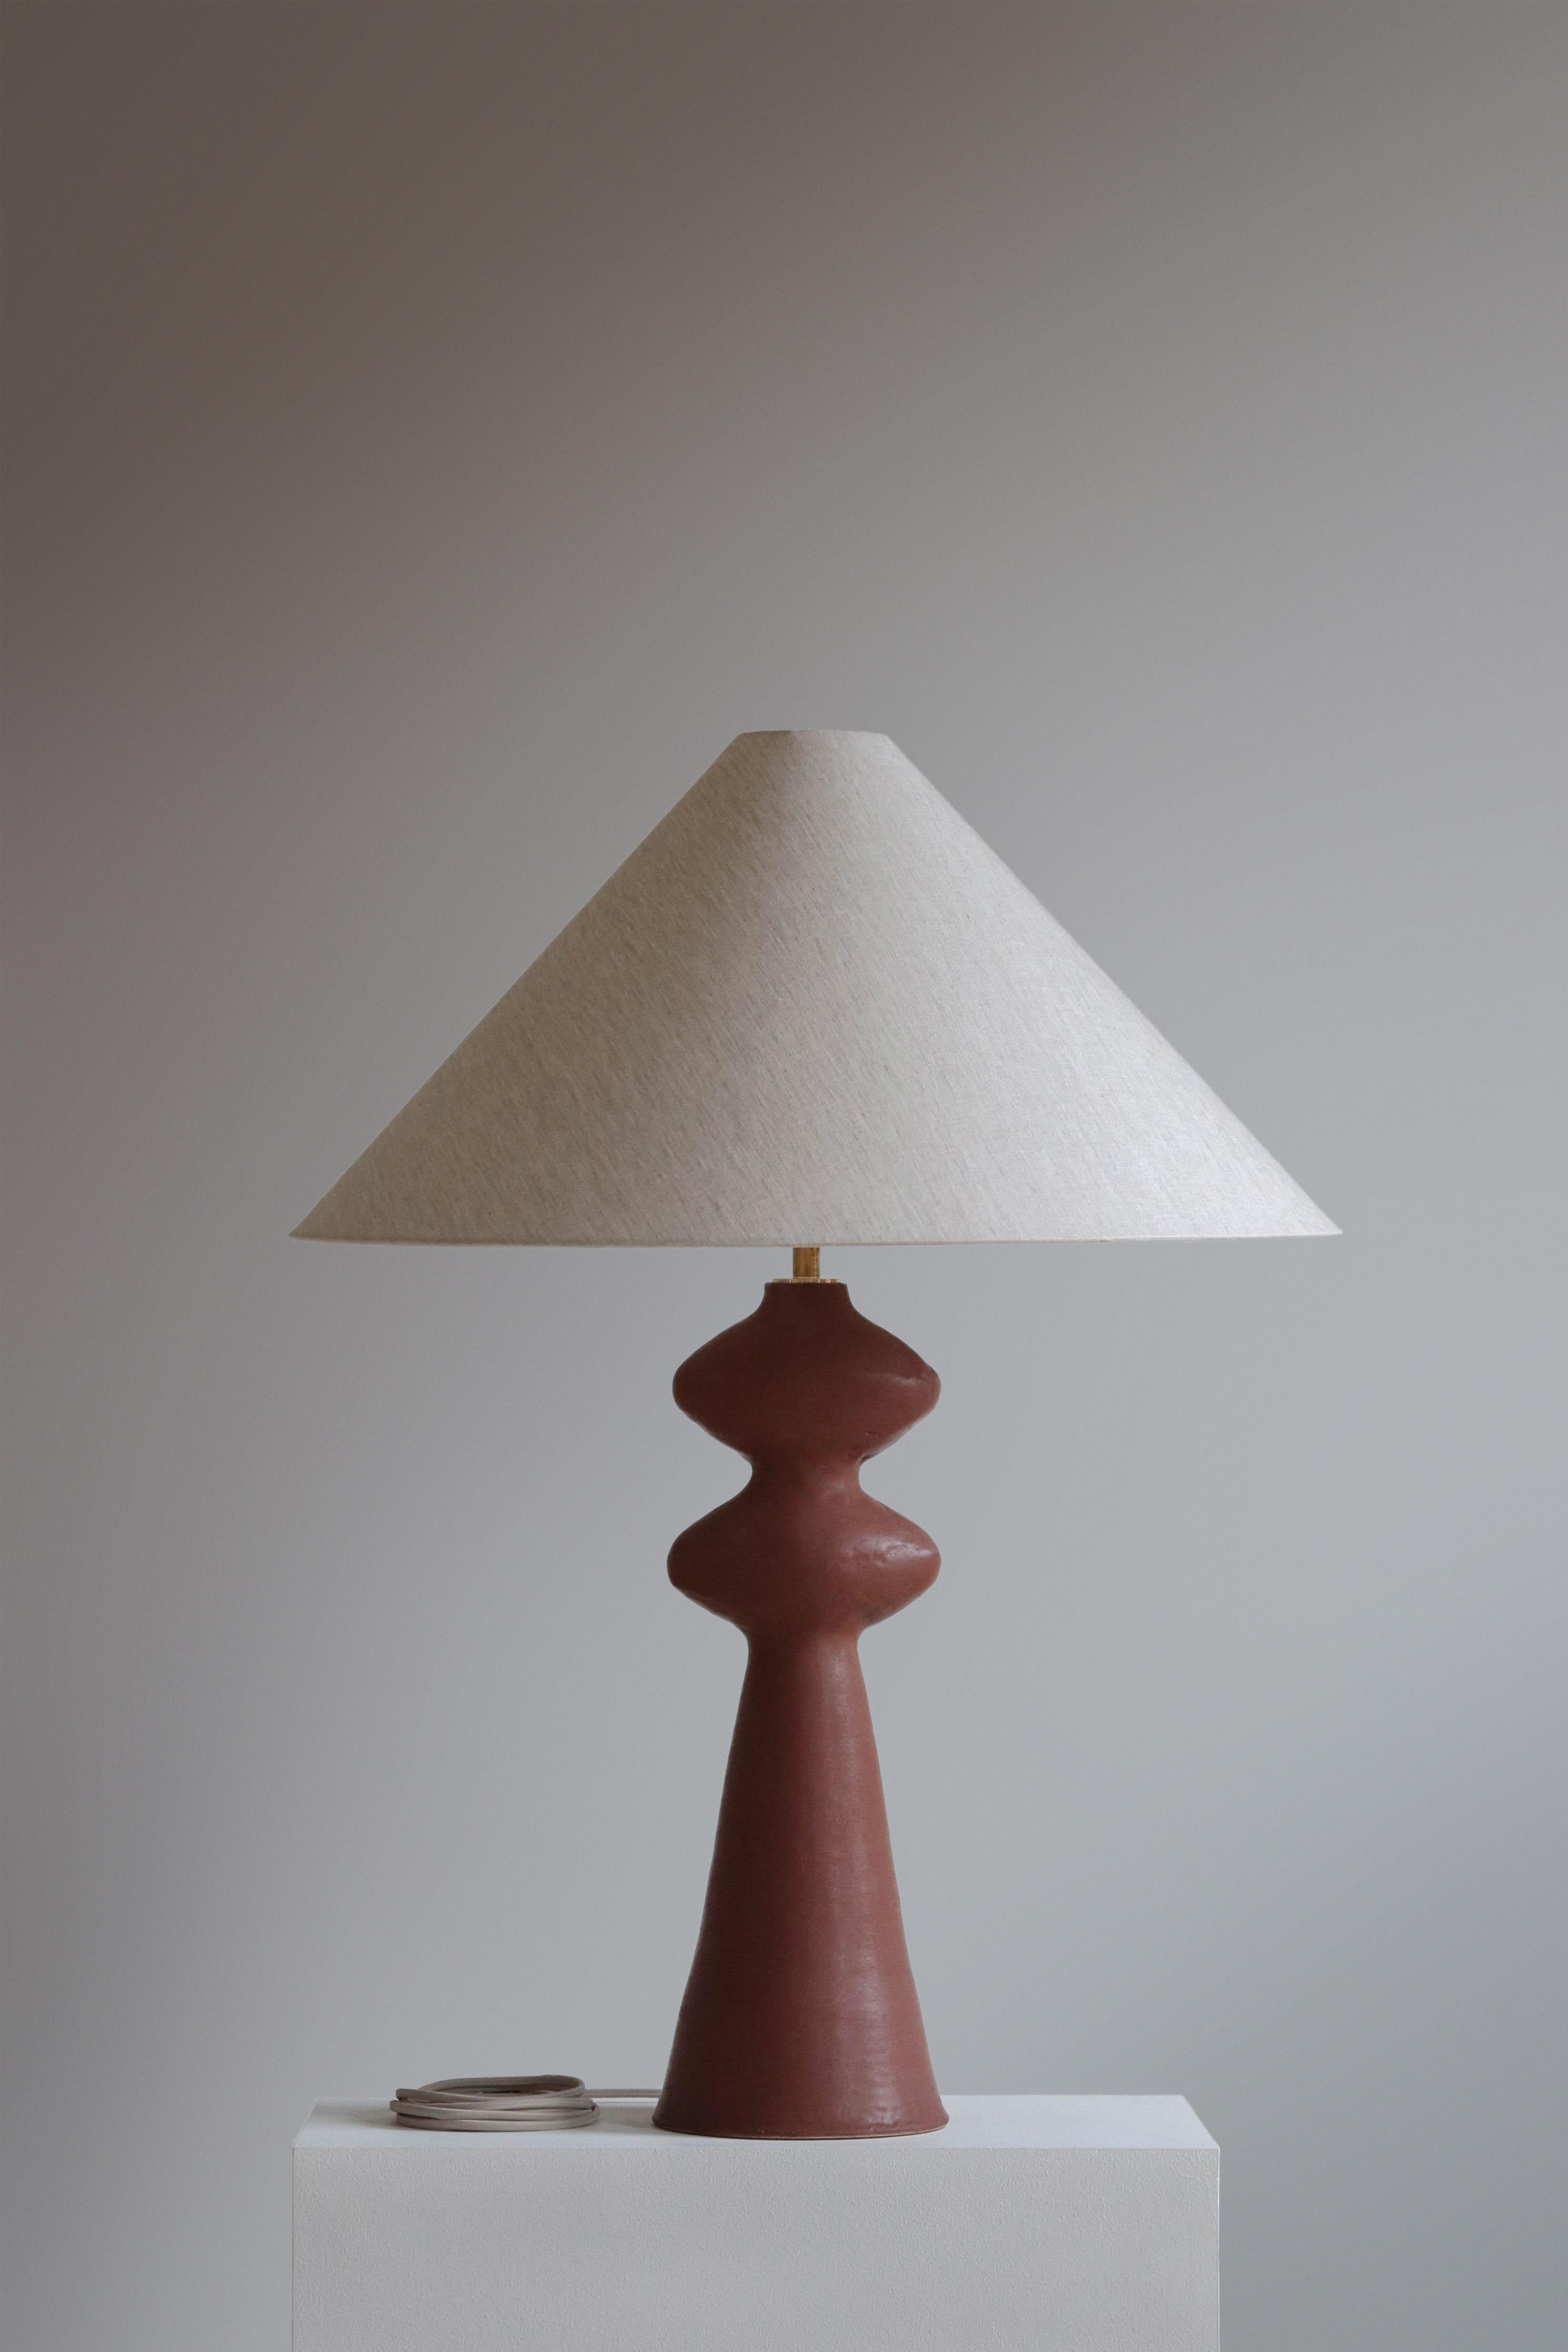 Chestnut Pollux 40 Table Lamp by Danny Kaplan Studio
Dimensions: ⌀ 72 x H 102 cm
Materials: Glazed Ceramic, Unfinished Brass, Wax Paper

This item is handmade, and may exhibit variability within the same piece. We do our best to maintain a